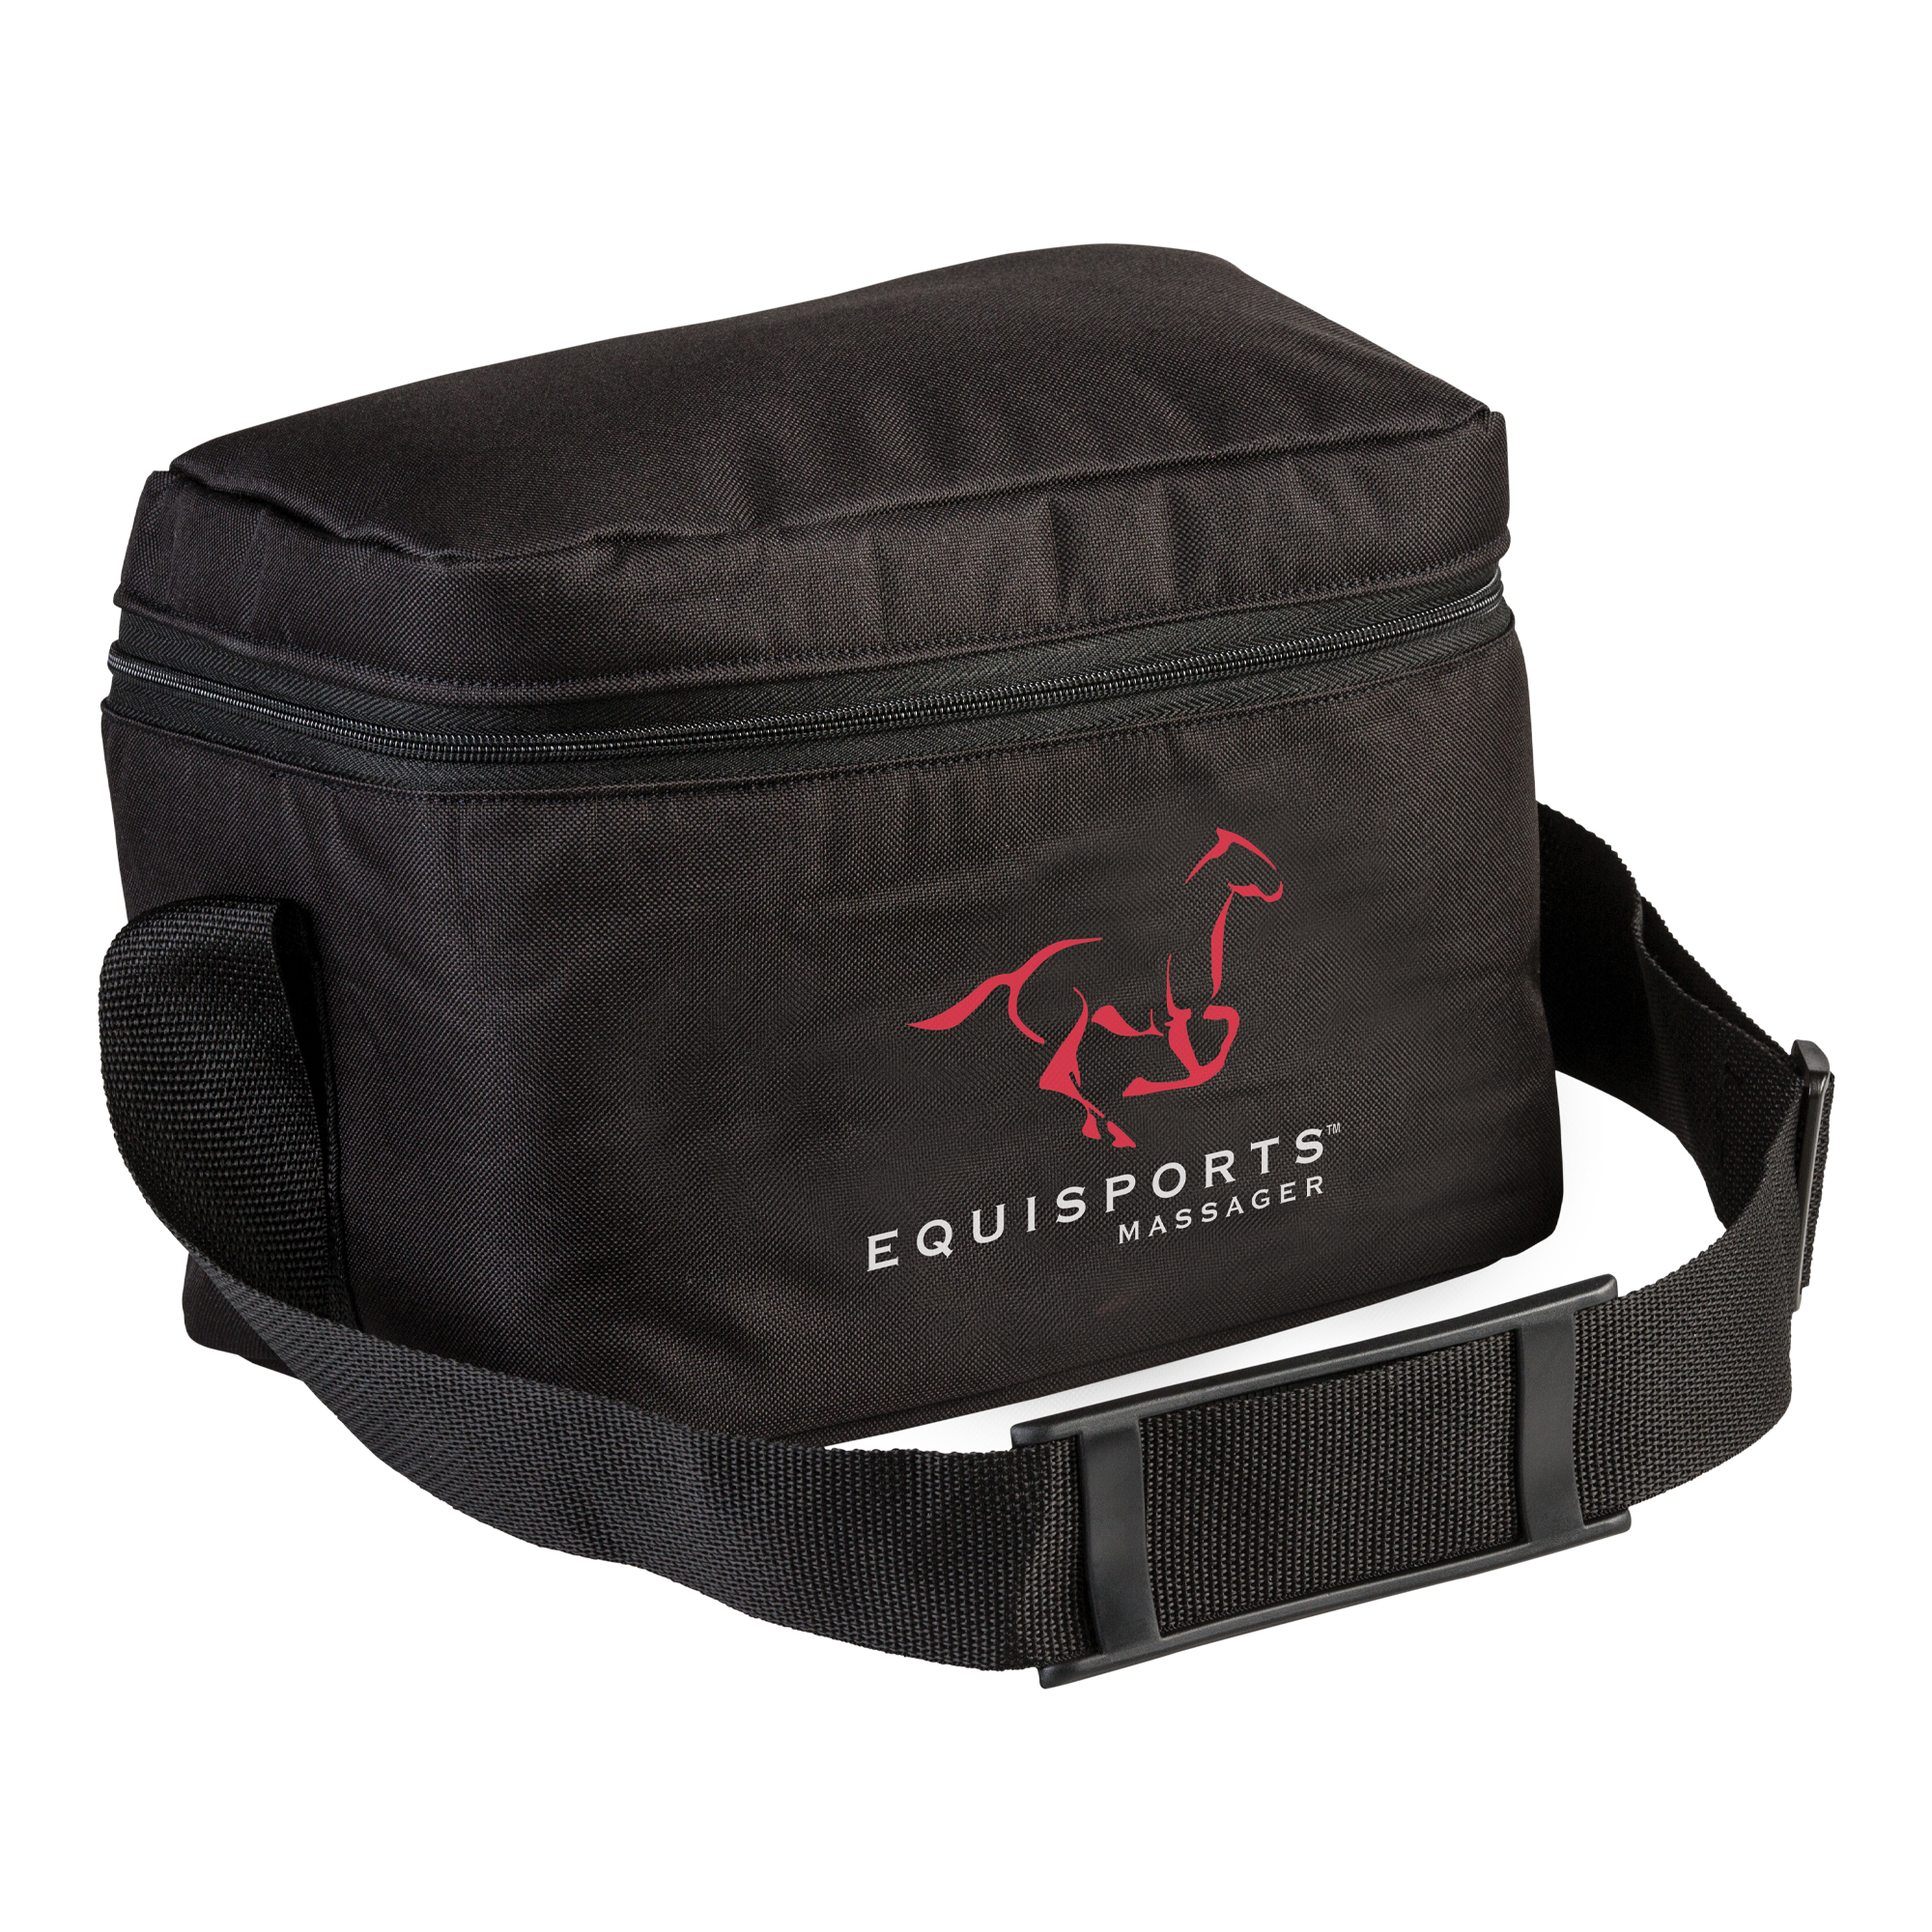 Equisports Massager Nylon Carrying Case